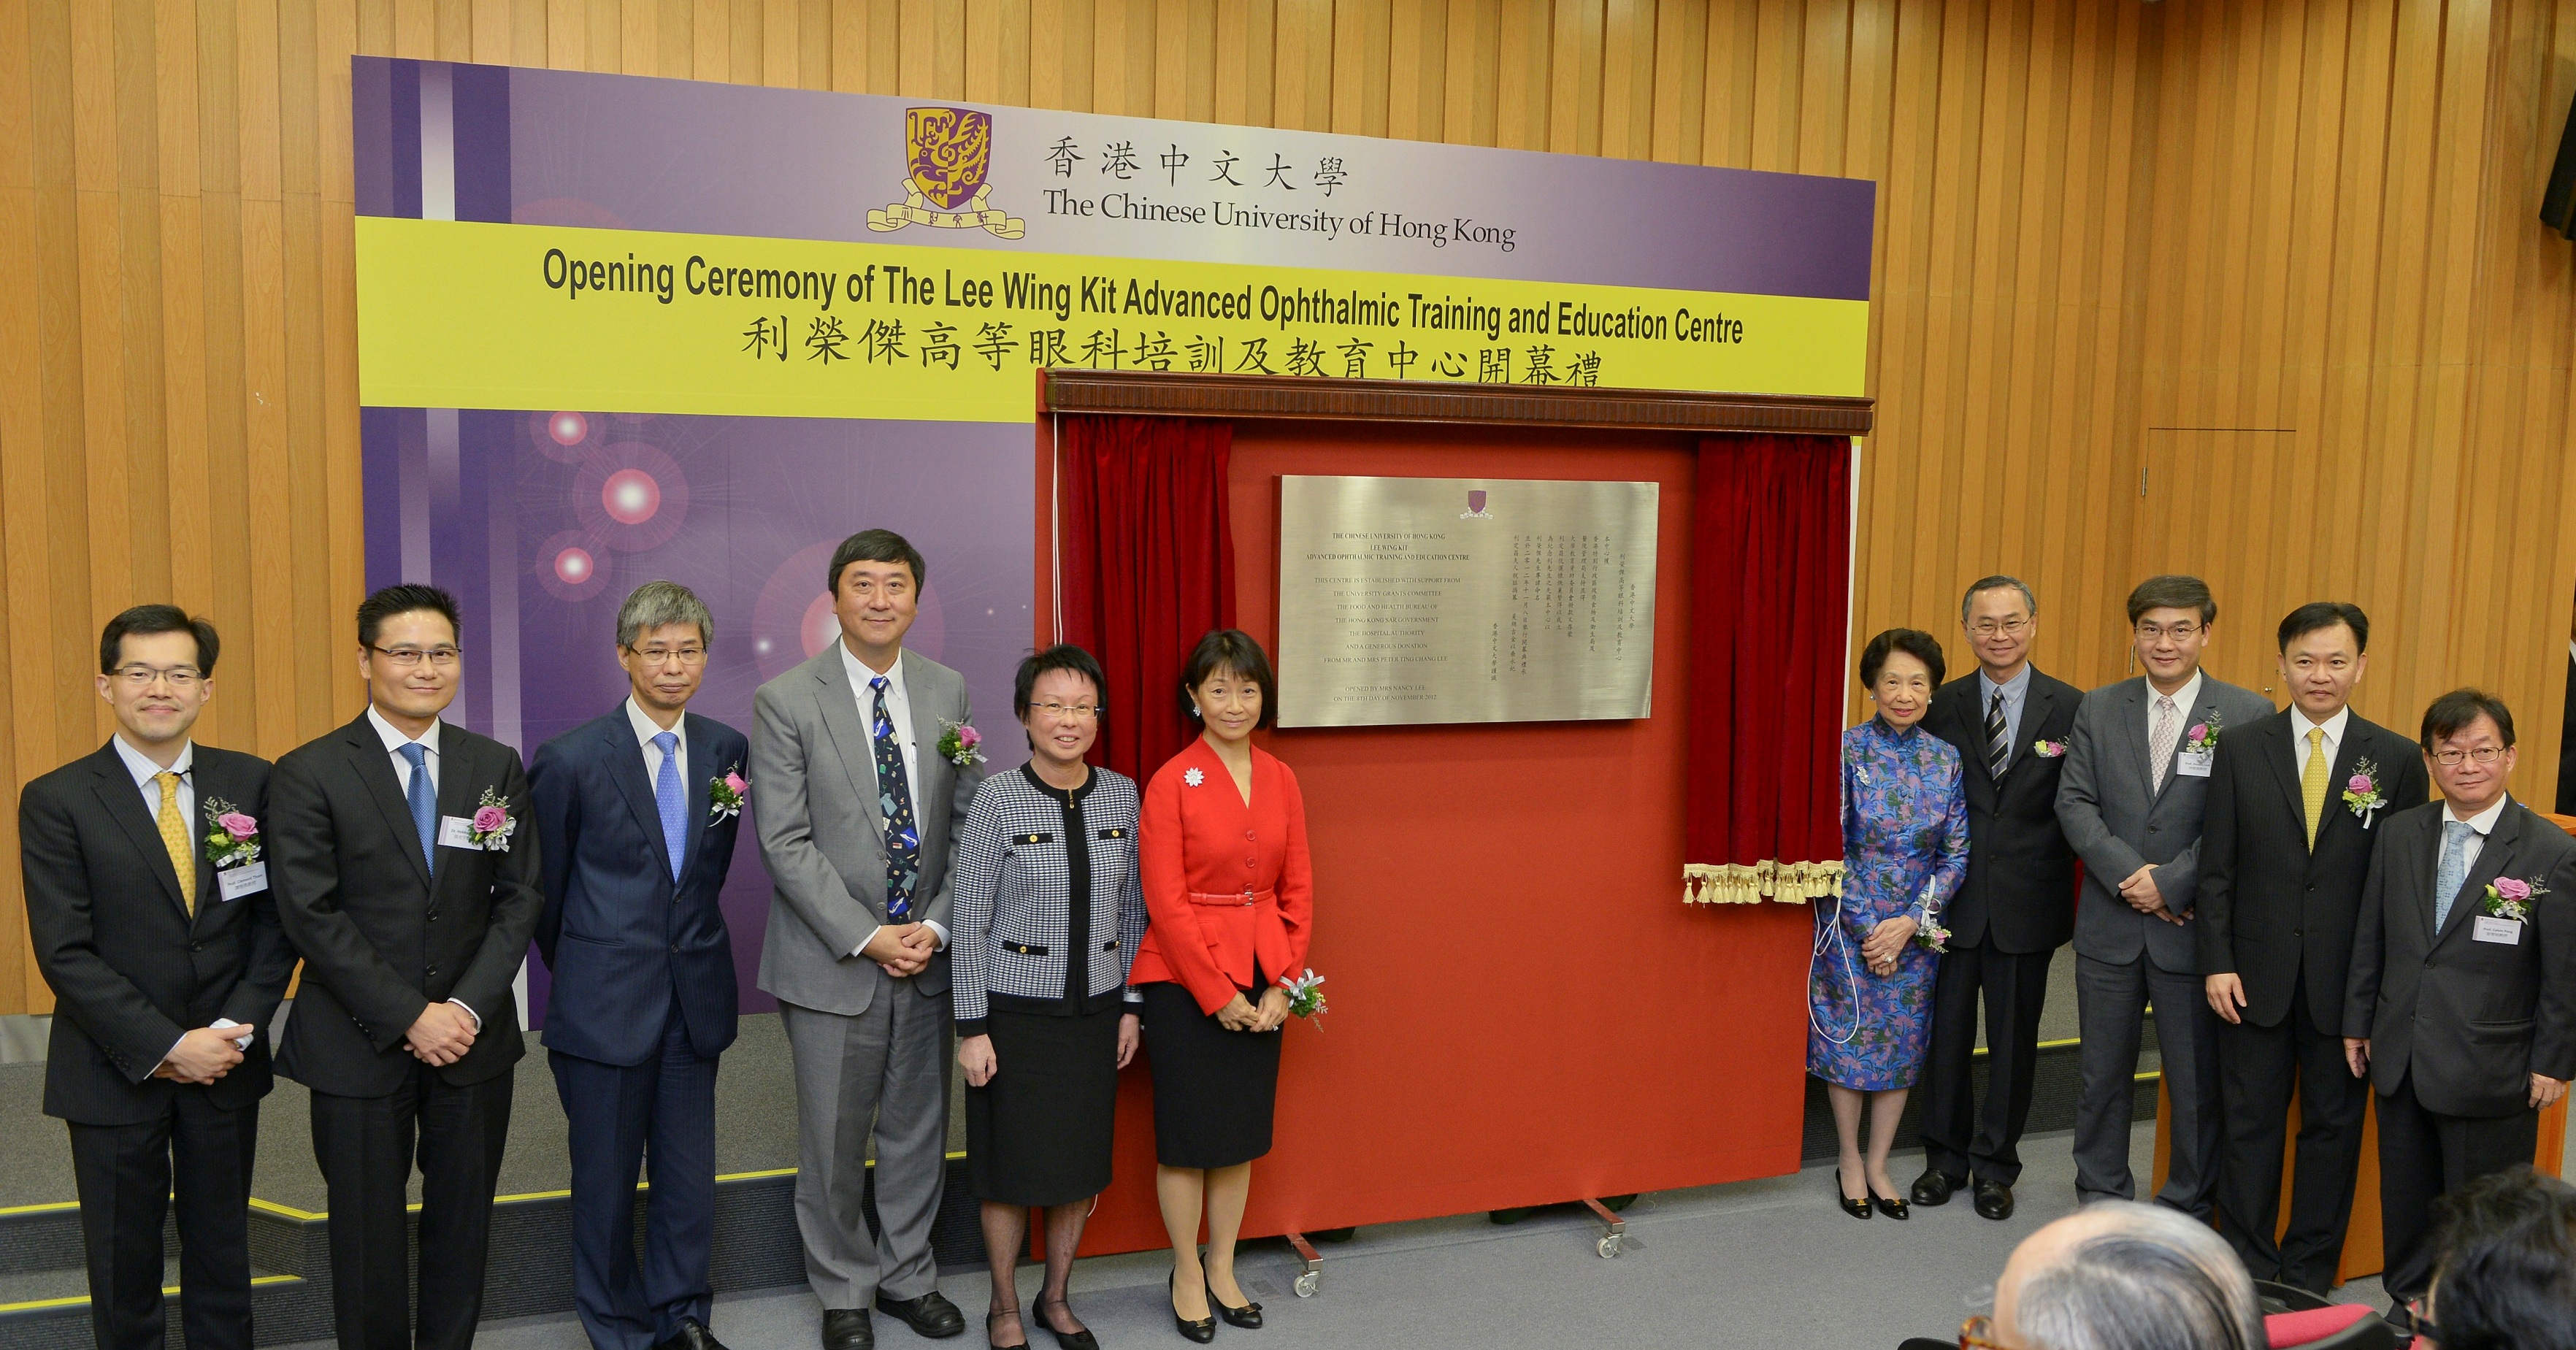 Officiating guests unveil the plaque of the Lee Wing Kit Advanced Ophthalmic Training and Education Centre: (from left) Professor Clement C Y Tham, Director of CUHK Eye Centre; Dr Cheung Kwong Yu, Hospital Chief Executive, Hong Kong Eye Hospital; Dr Hung Chi Tim, Cluster Chief Executive, Kowloon Central Cluster, Hospital Authority; Prof. Joseph J Y Sung, Vice-Chancellor and President, CUHK ; Ms Florence Lee; Mrs Nancy Lee; Mrs Helen Lee; Professor Fok Tai Fai, Dean of Medicine, CUHK; Professor Dennis S C Lam, Honorary Professor of Department of Ophthalmology and Visual Sciences, CUHK; Dr Leung Pak Yin, Chief Executive, Hospital Authority; Professor Calvin C P Pang, Chairman of Department of Ophthalmology and Visual Sciences, CUHK